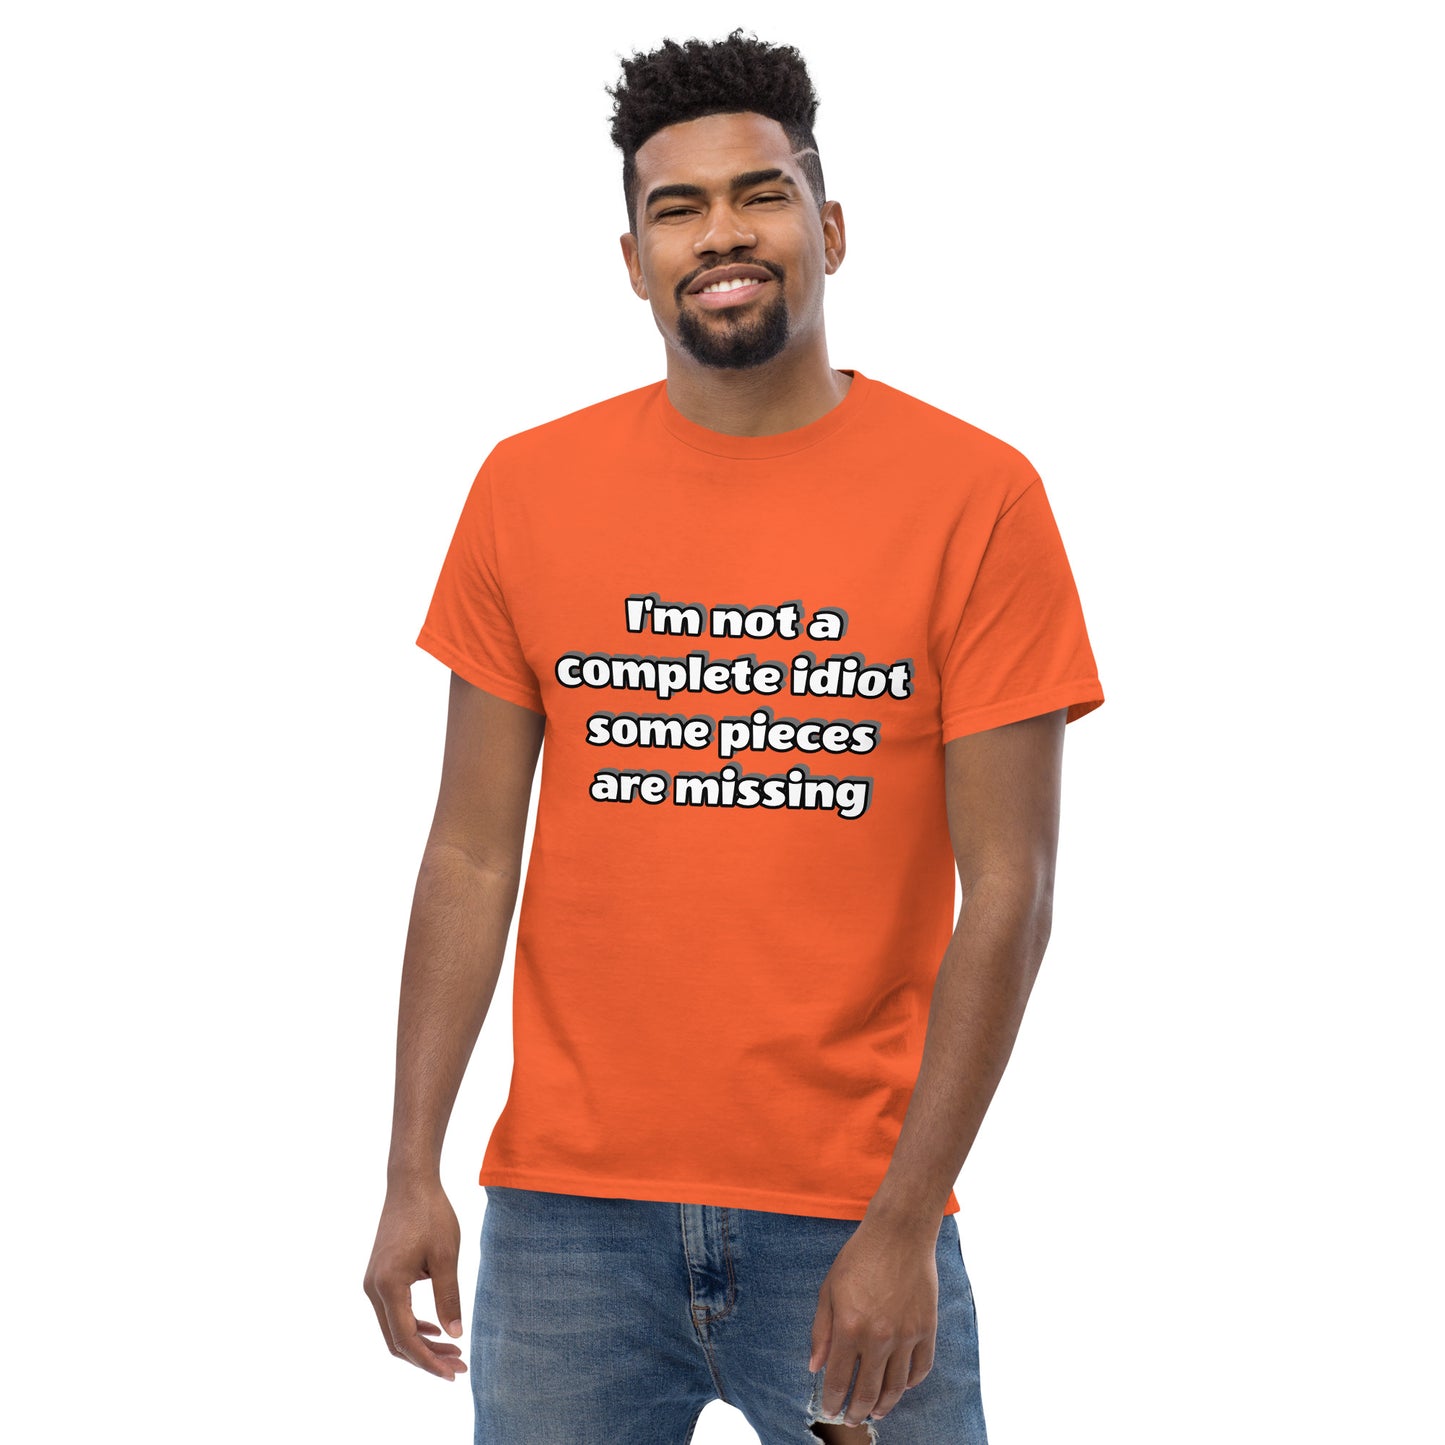 Men with orange t-shirt with text “I’m not a complete idiot, some pieces are missing”